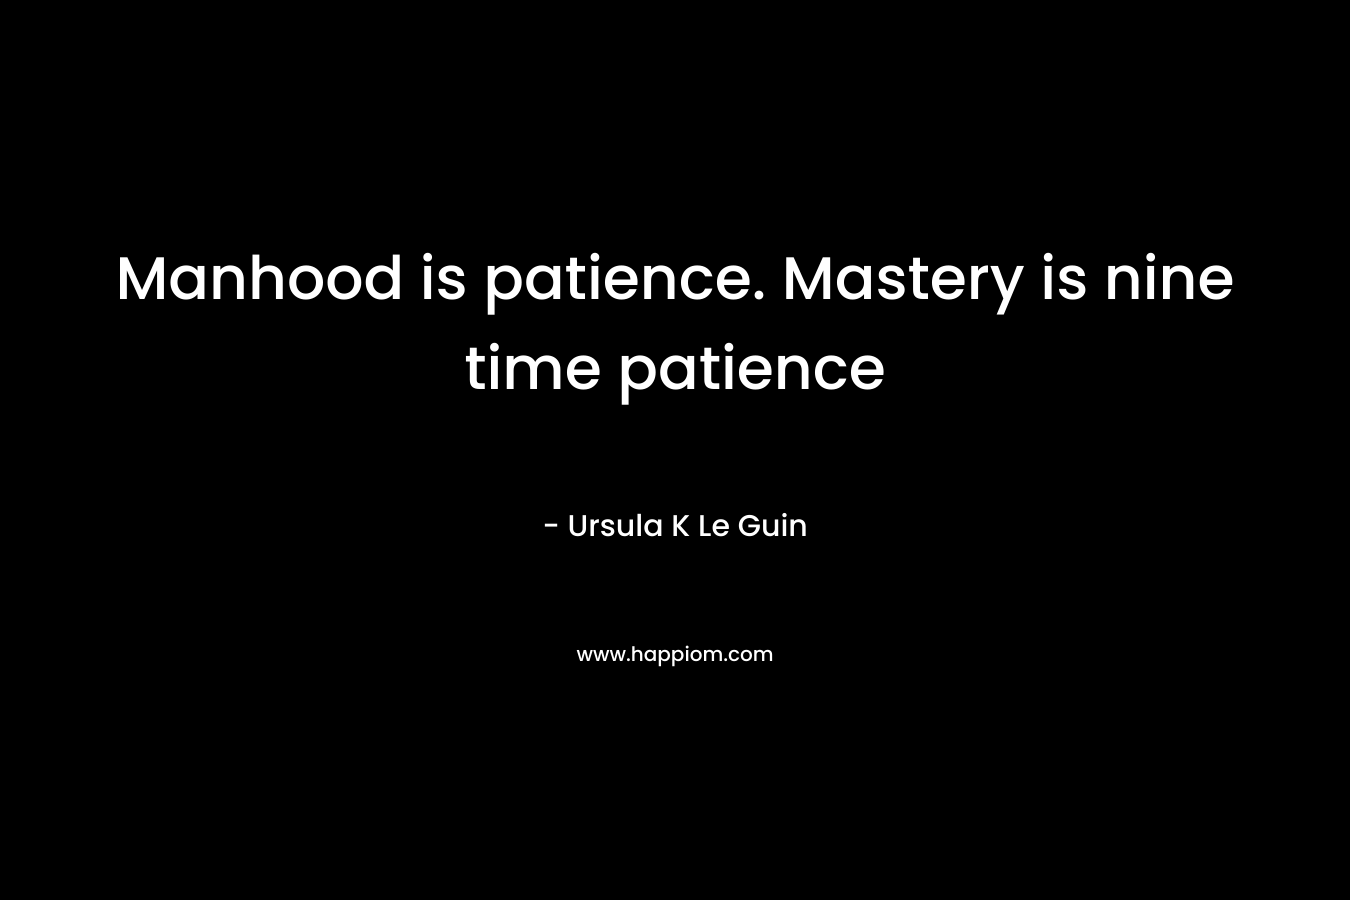 Manhood is patience. Mastery is nine time patience – Ursula K Le Guin